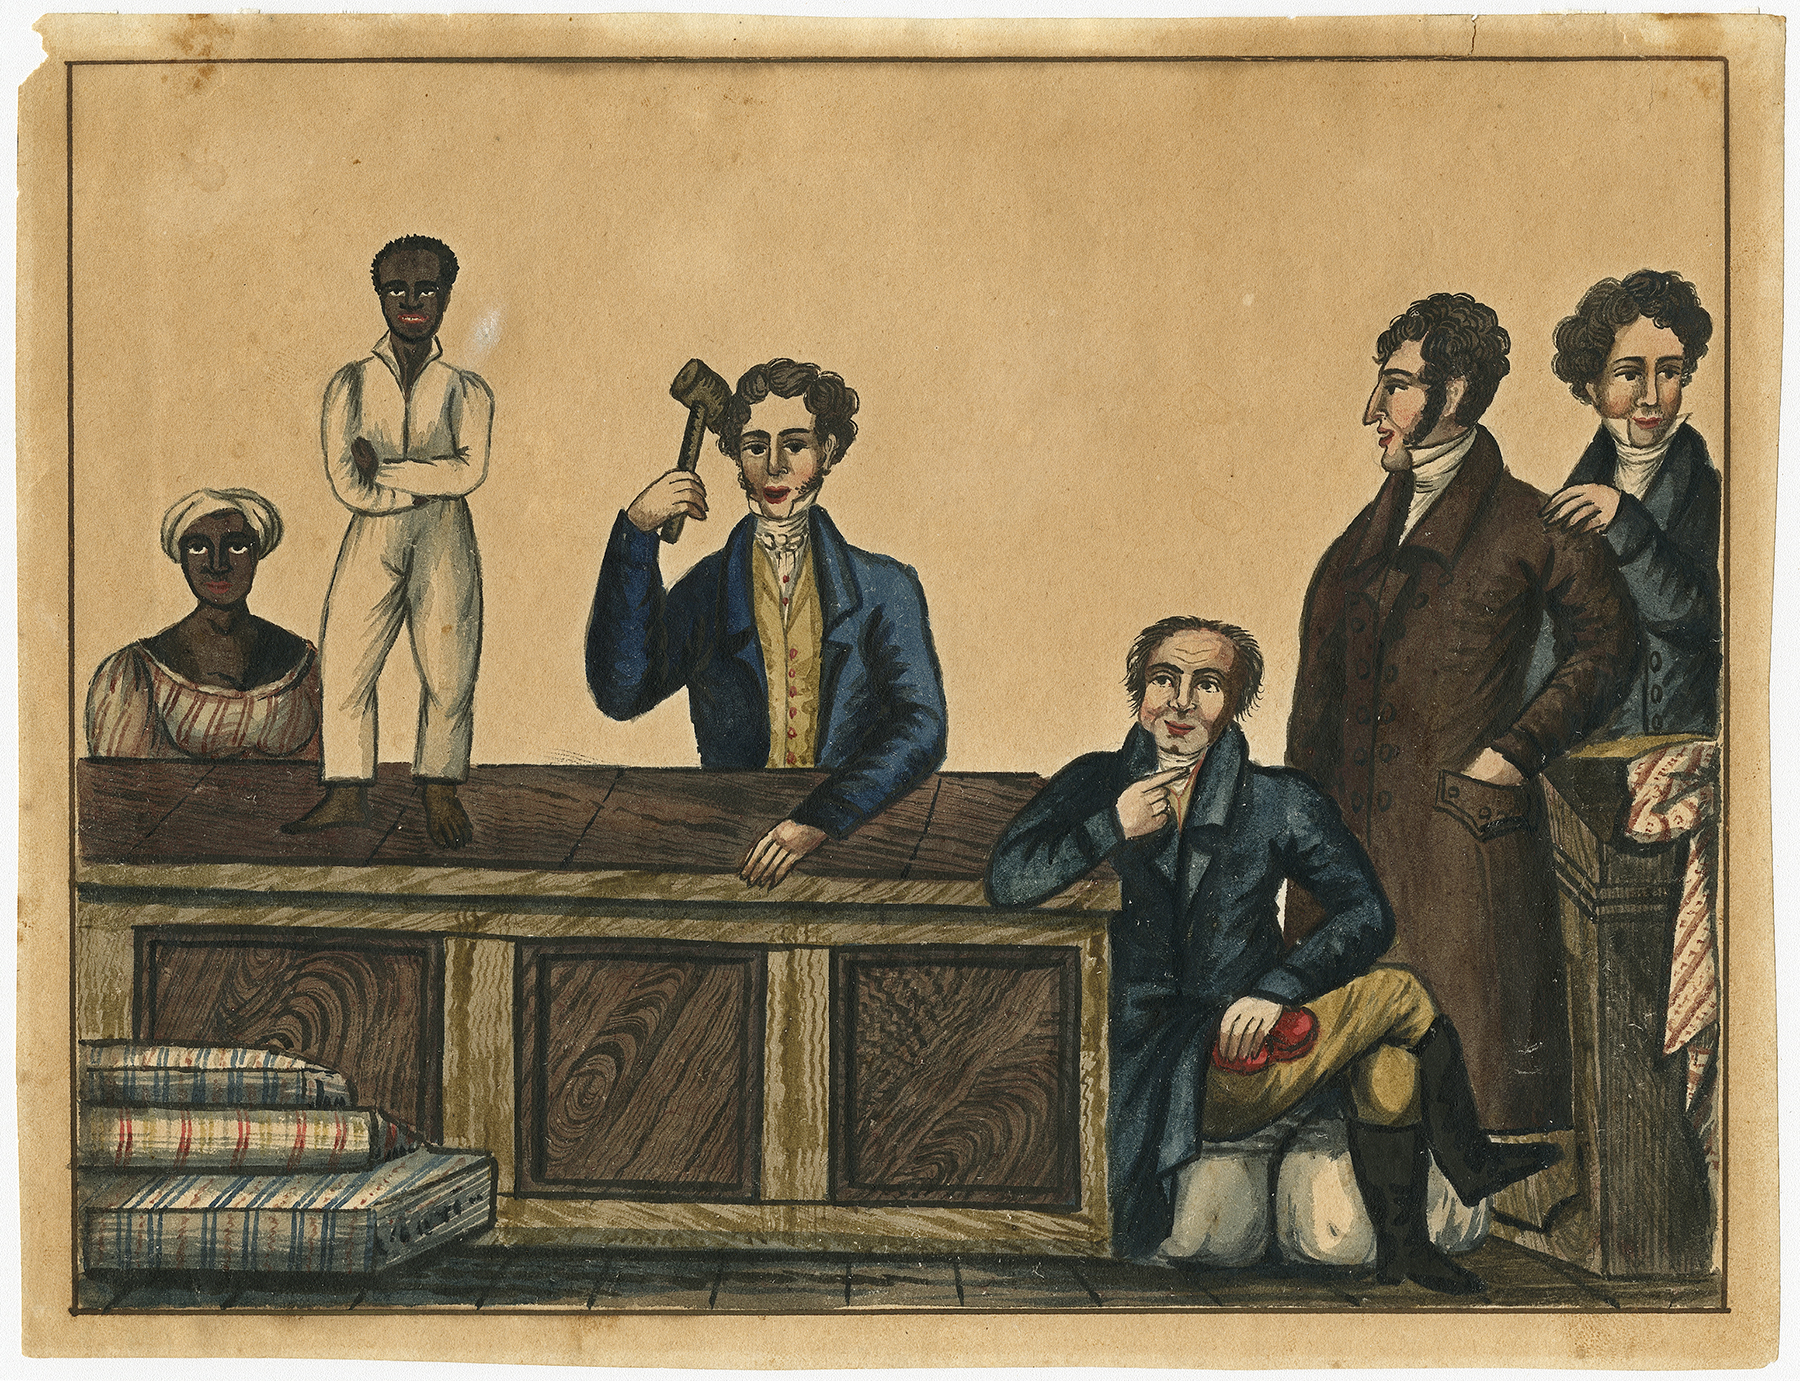 Slave Auction; ca. 1831; ink and watercolor; The Historic New Orleans Collection, 1941.3. Photograph courtesy of The Historic New Orleans Collection